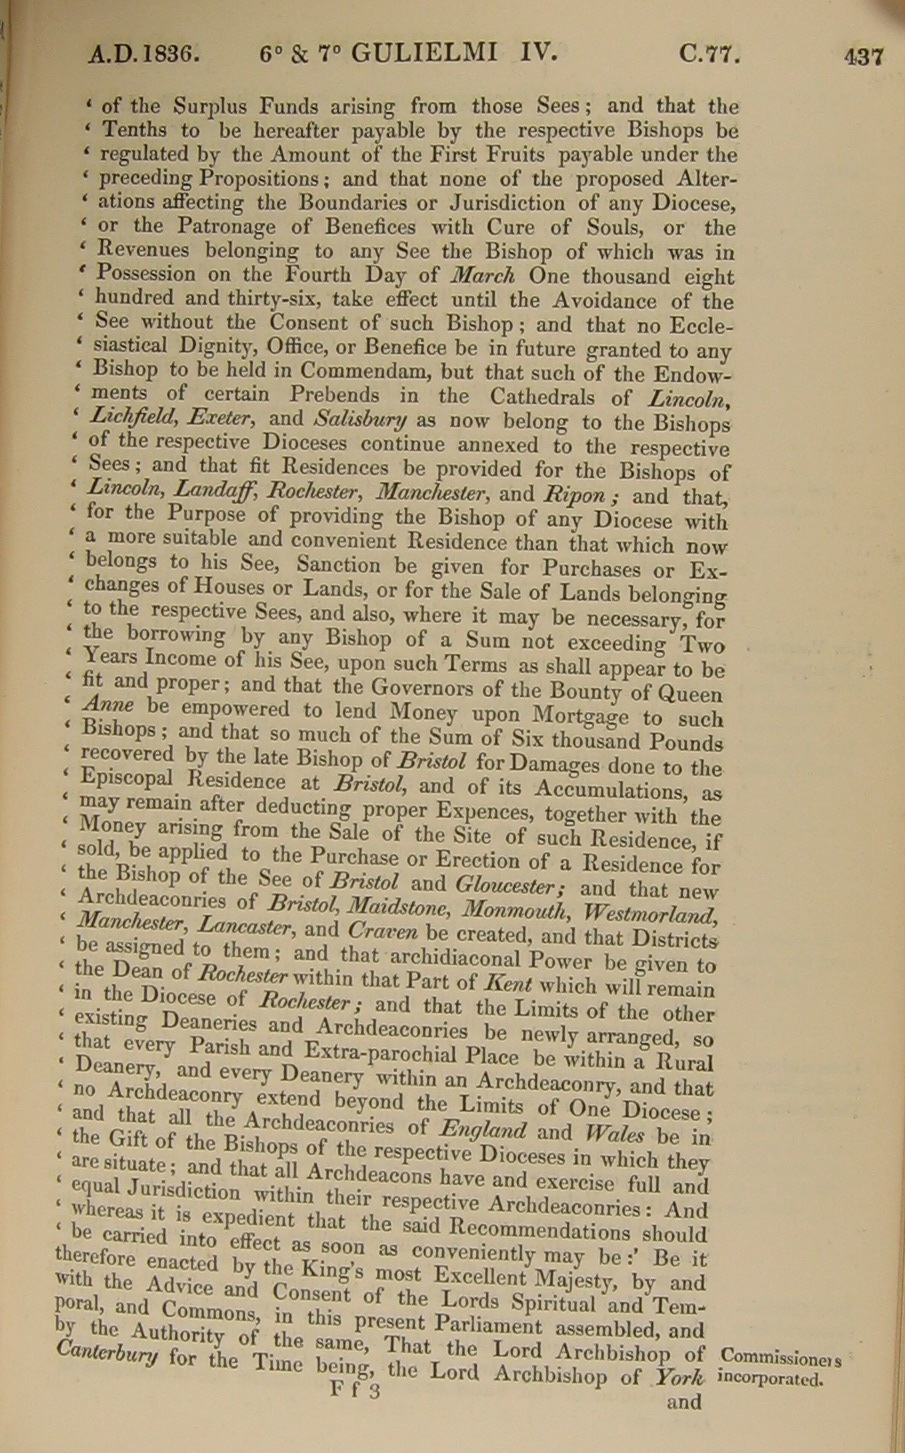 Image of 6 & 7 William IV, c. 77 (page 6 of 12). Click for larger image.